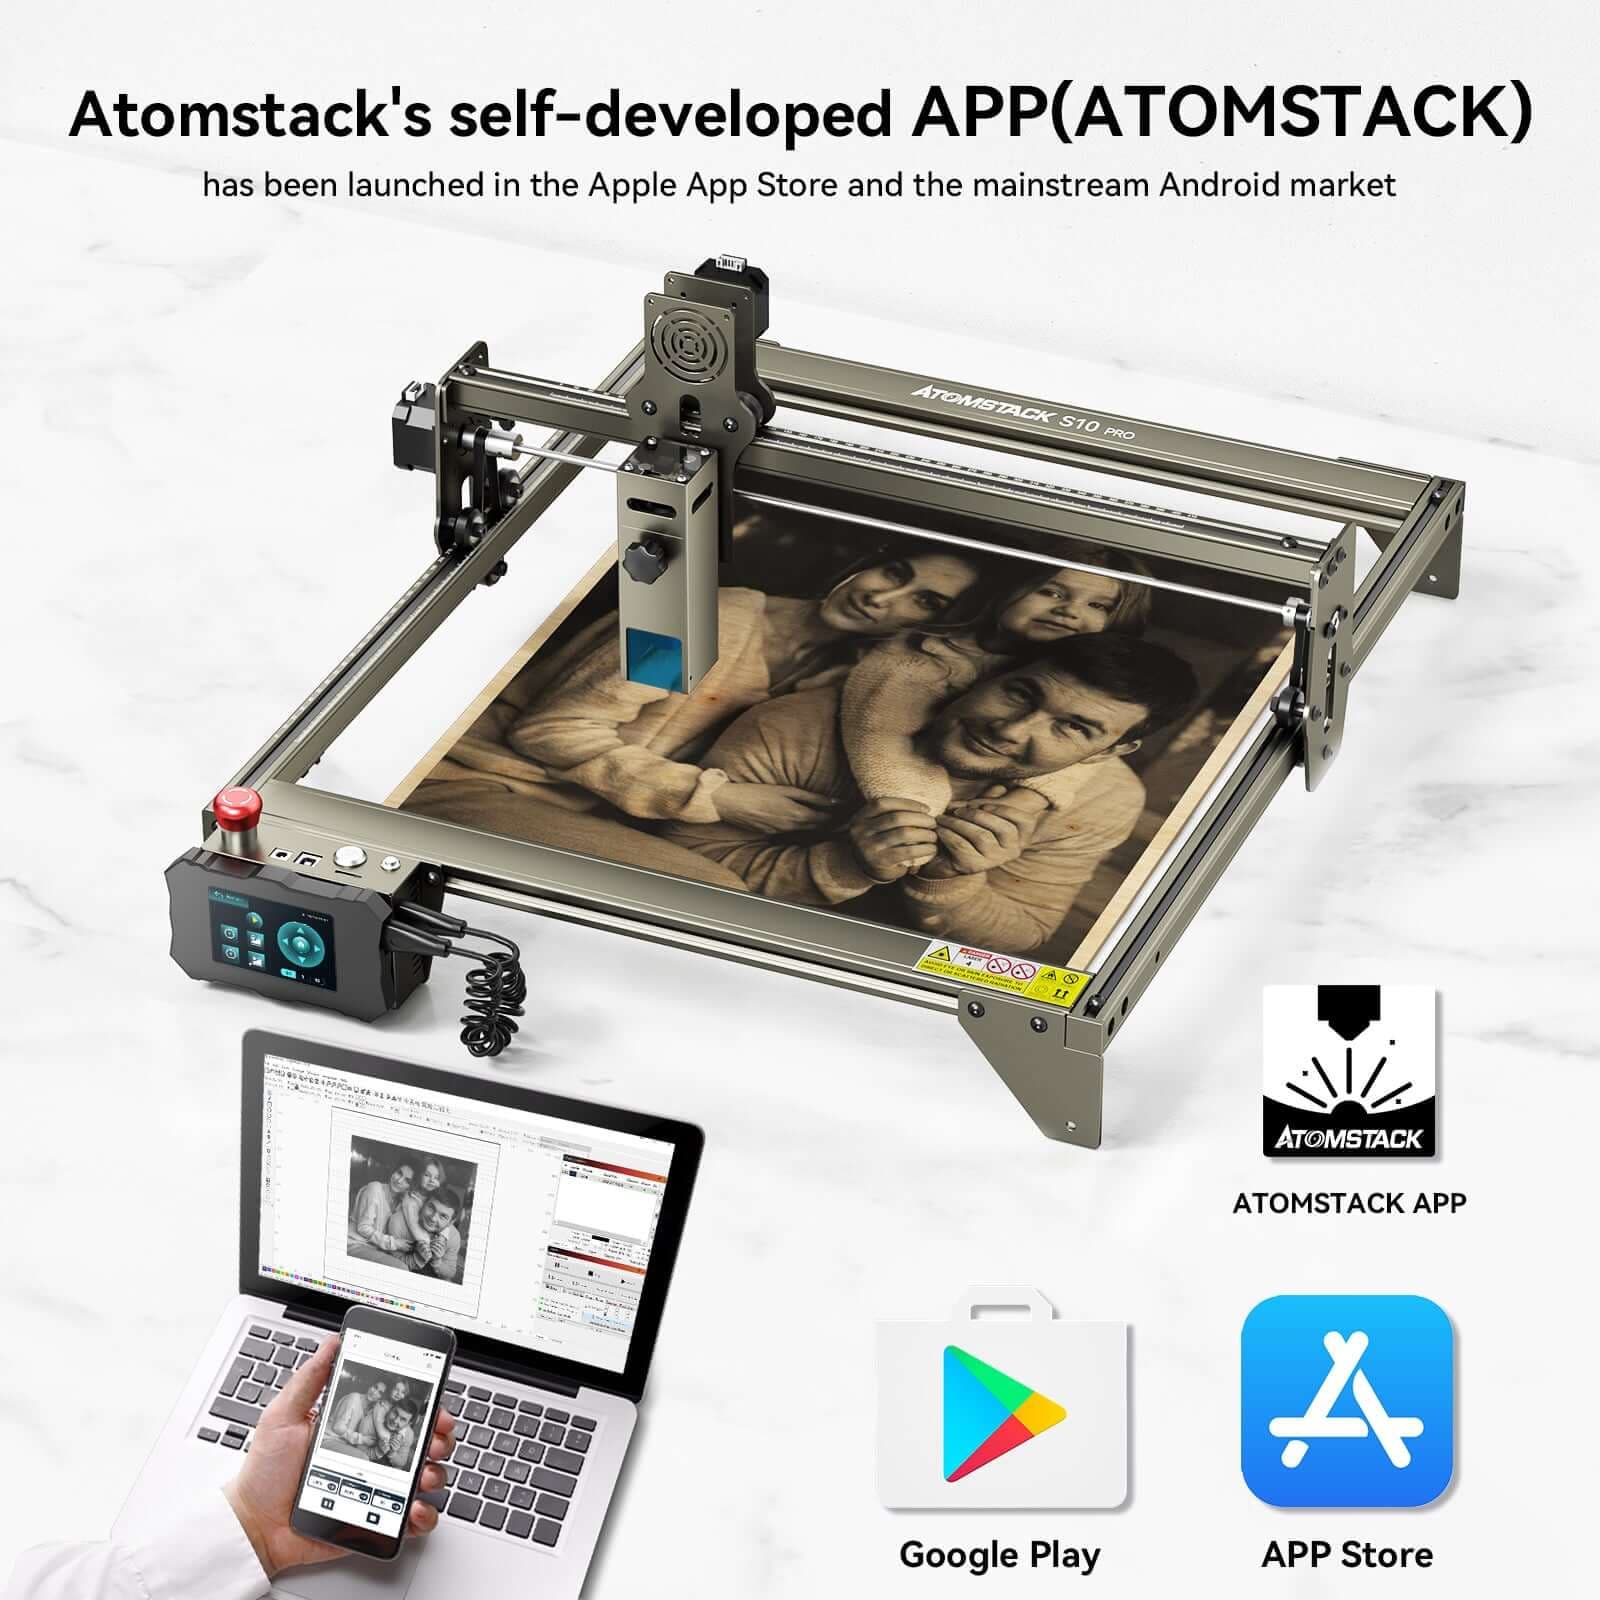  ATOMSTACK A5 Pro Laser Engraver, 40W Laser Engraving Cutting  Machine for Wood, 5W-5.5W Output Power, Compressed Spot CNC Carving DIY  Laser Master, Eye Protection Fixed-Focus, 400x410mm